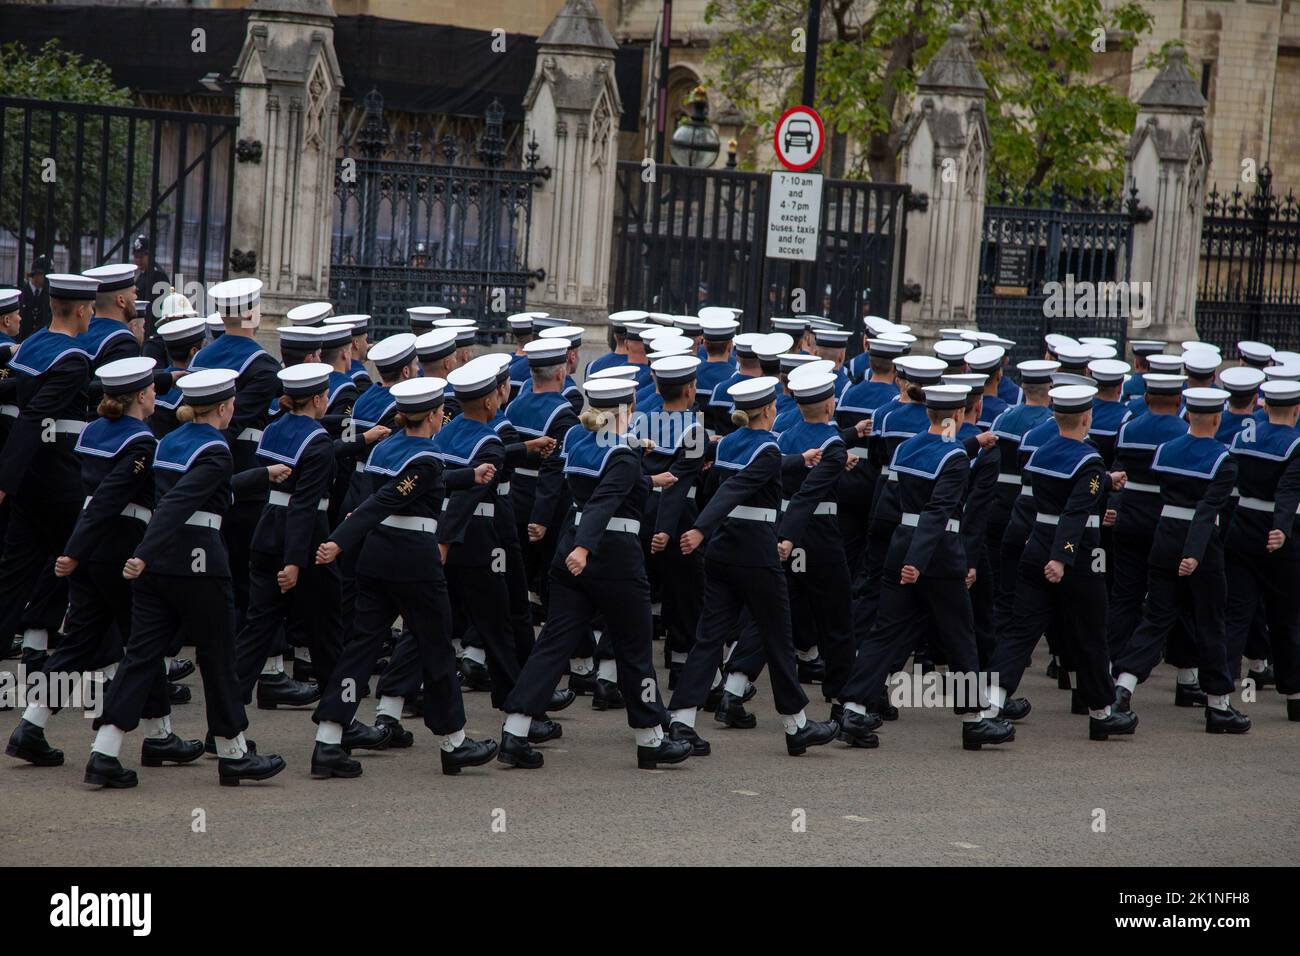 London, England. 19th September, 2022. Members of the Royal Navy march past the Palace of Westminster in a procession for State Funeral of Queen Elizabeth II. The event was held in London and Windsor today and was one of the biggest the country has ever seen. Credit: Kiki Streitberger / Alamy Live News Stock Photo